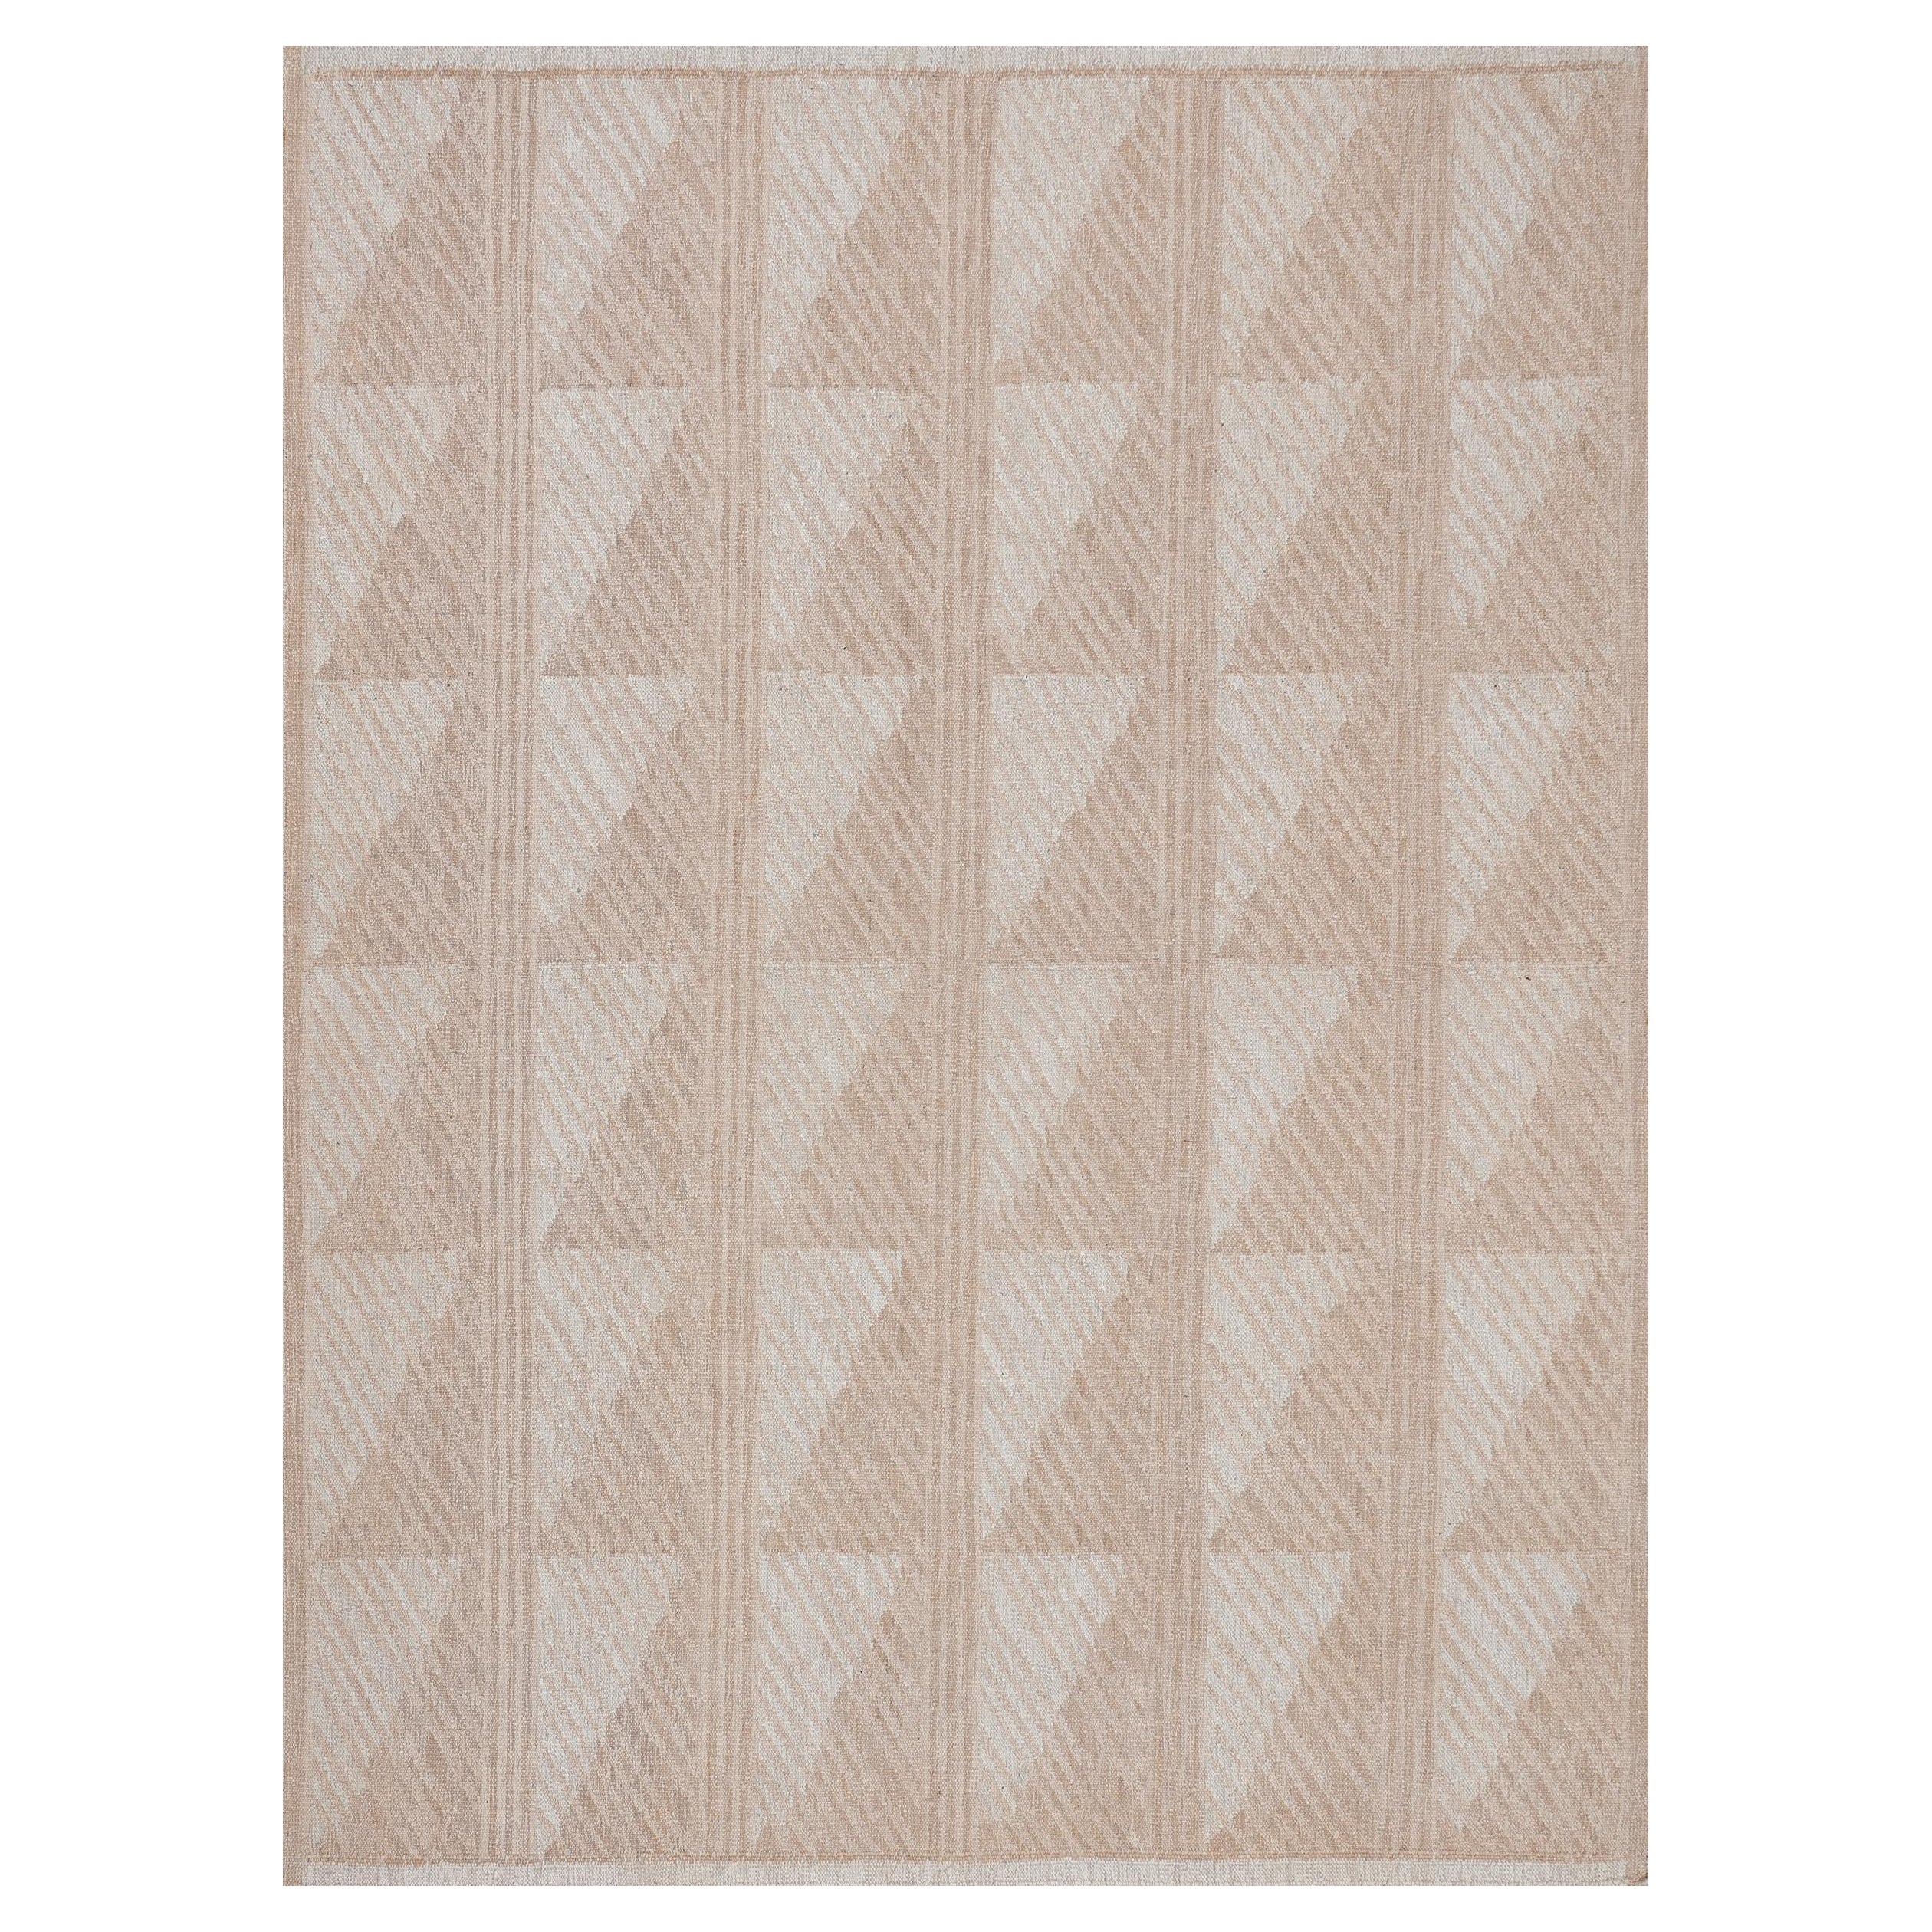 Contemporary Hand-woven 100% Wool Beige Graphic Rug 9'1"x12'4"